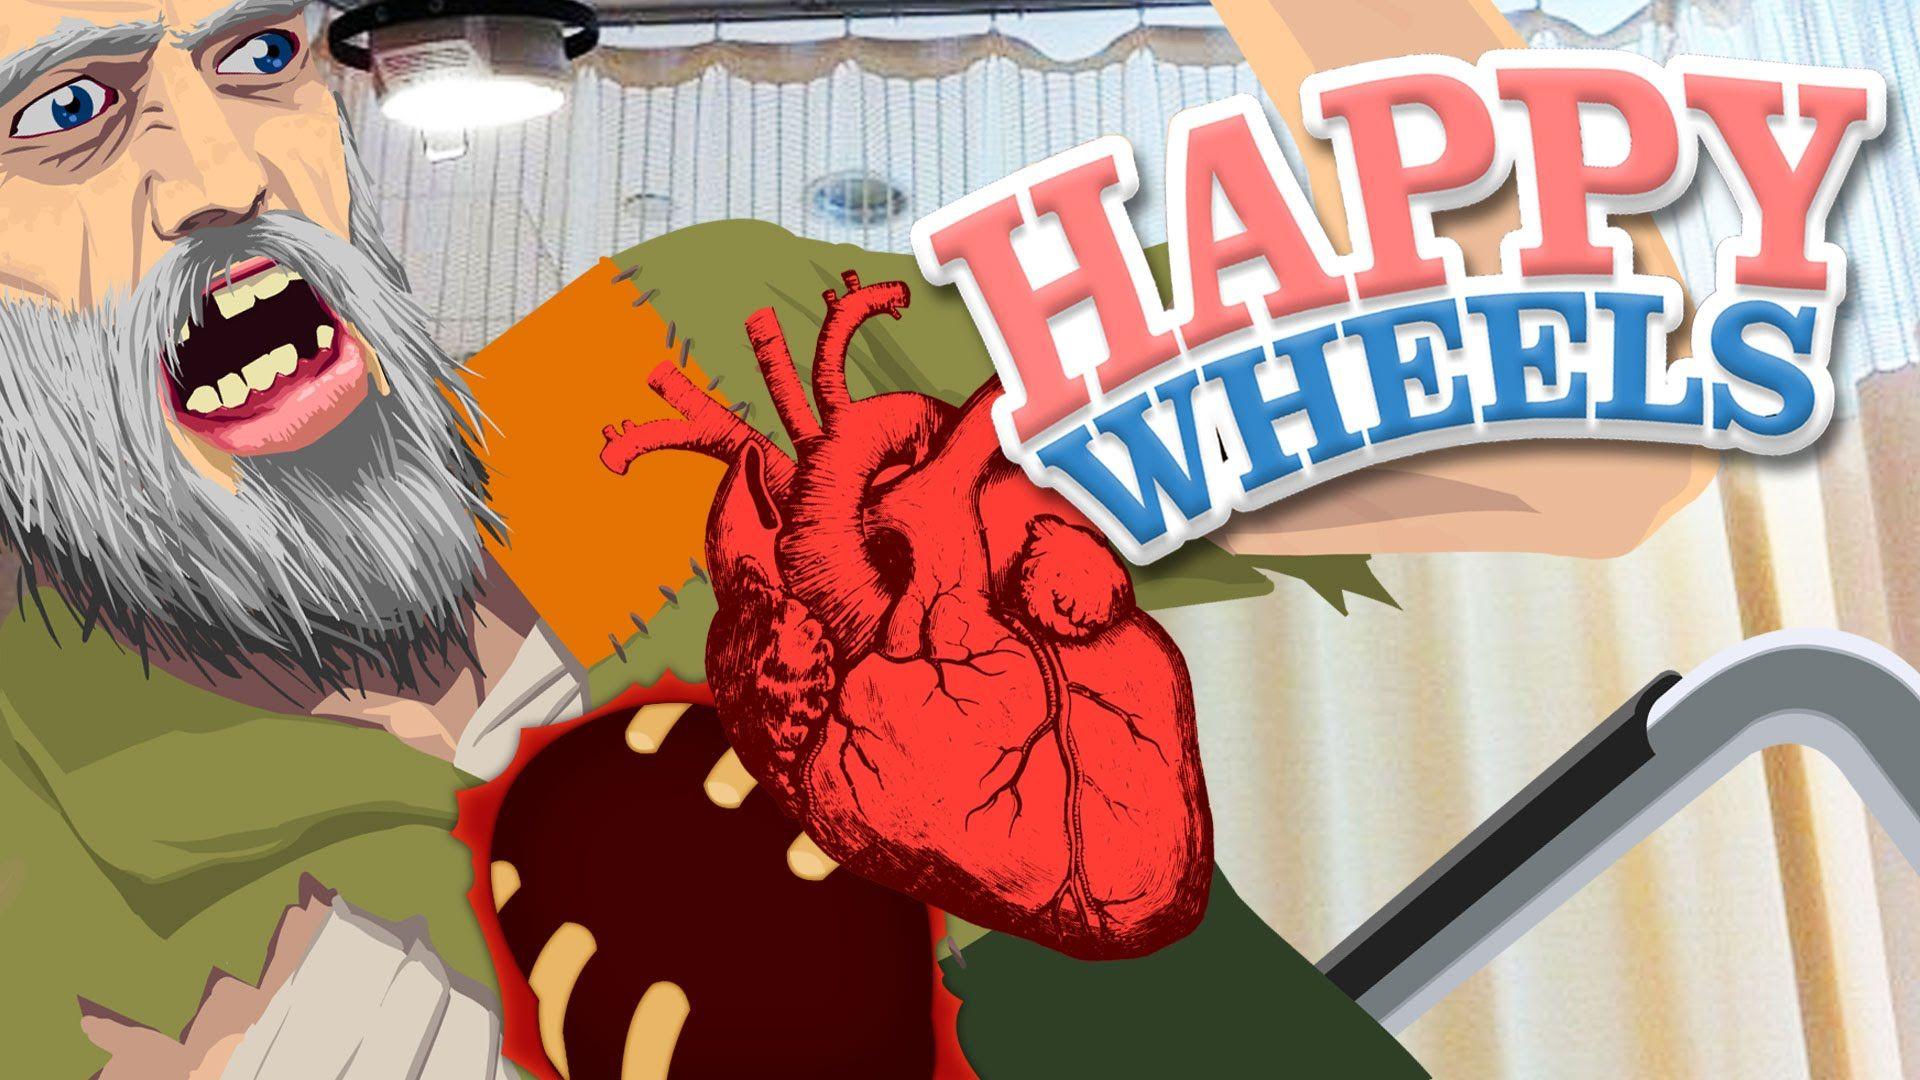 is the full happy wheels free